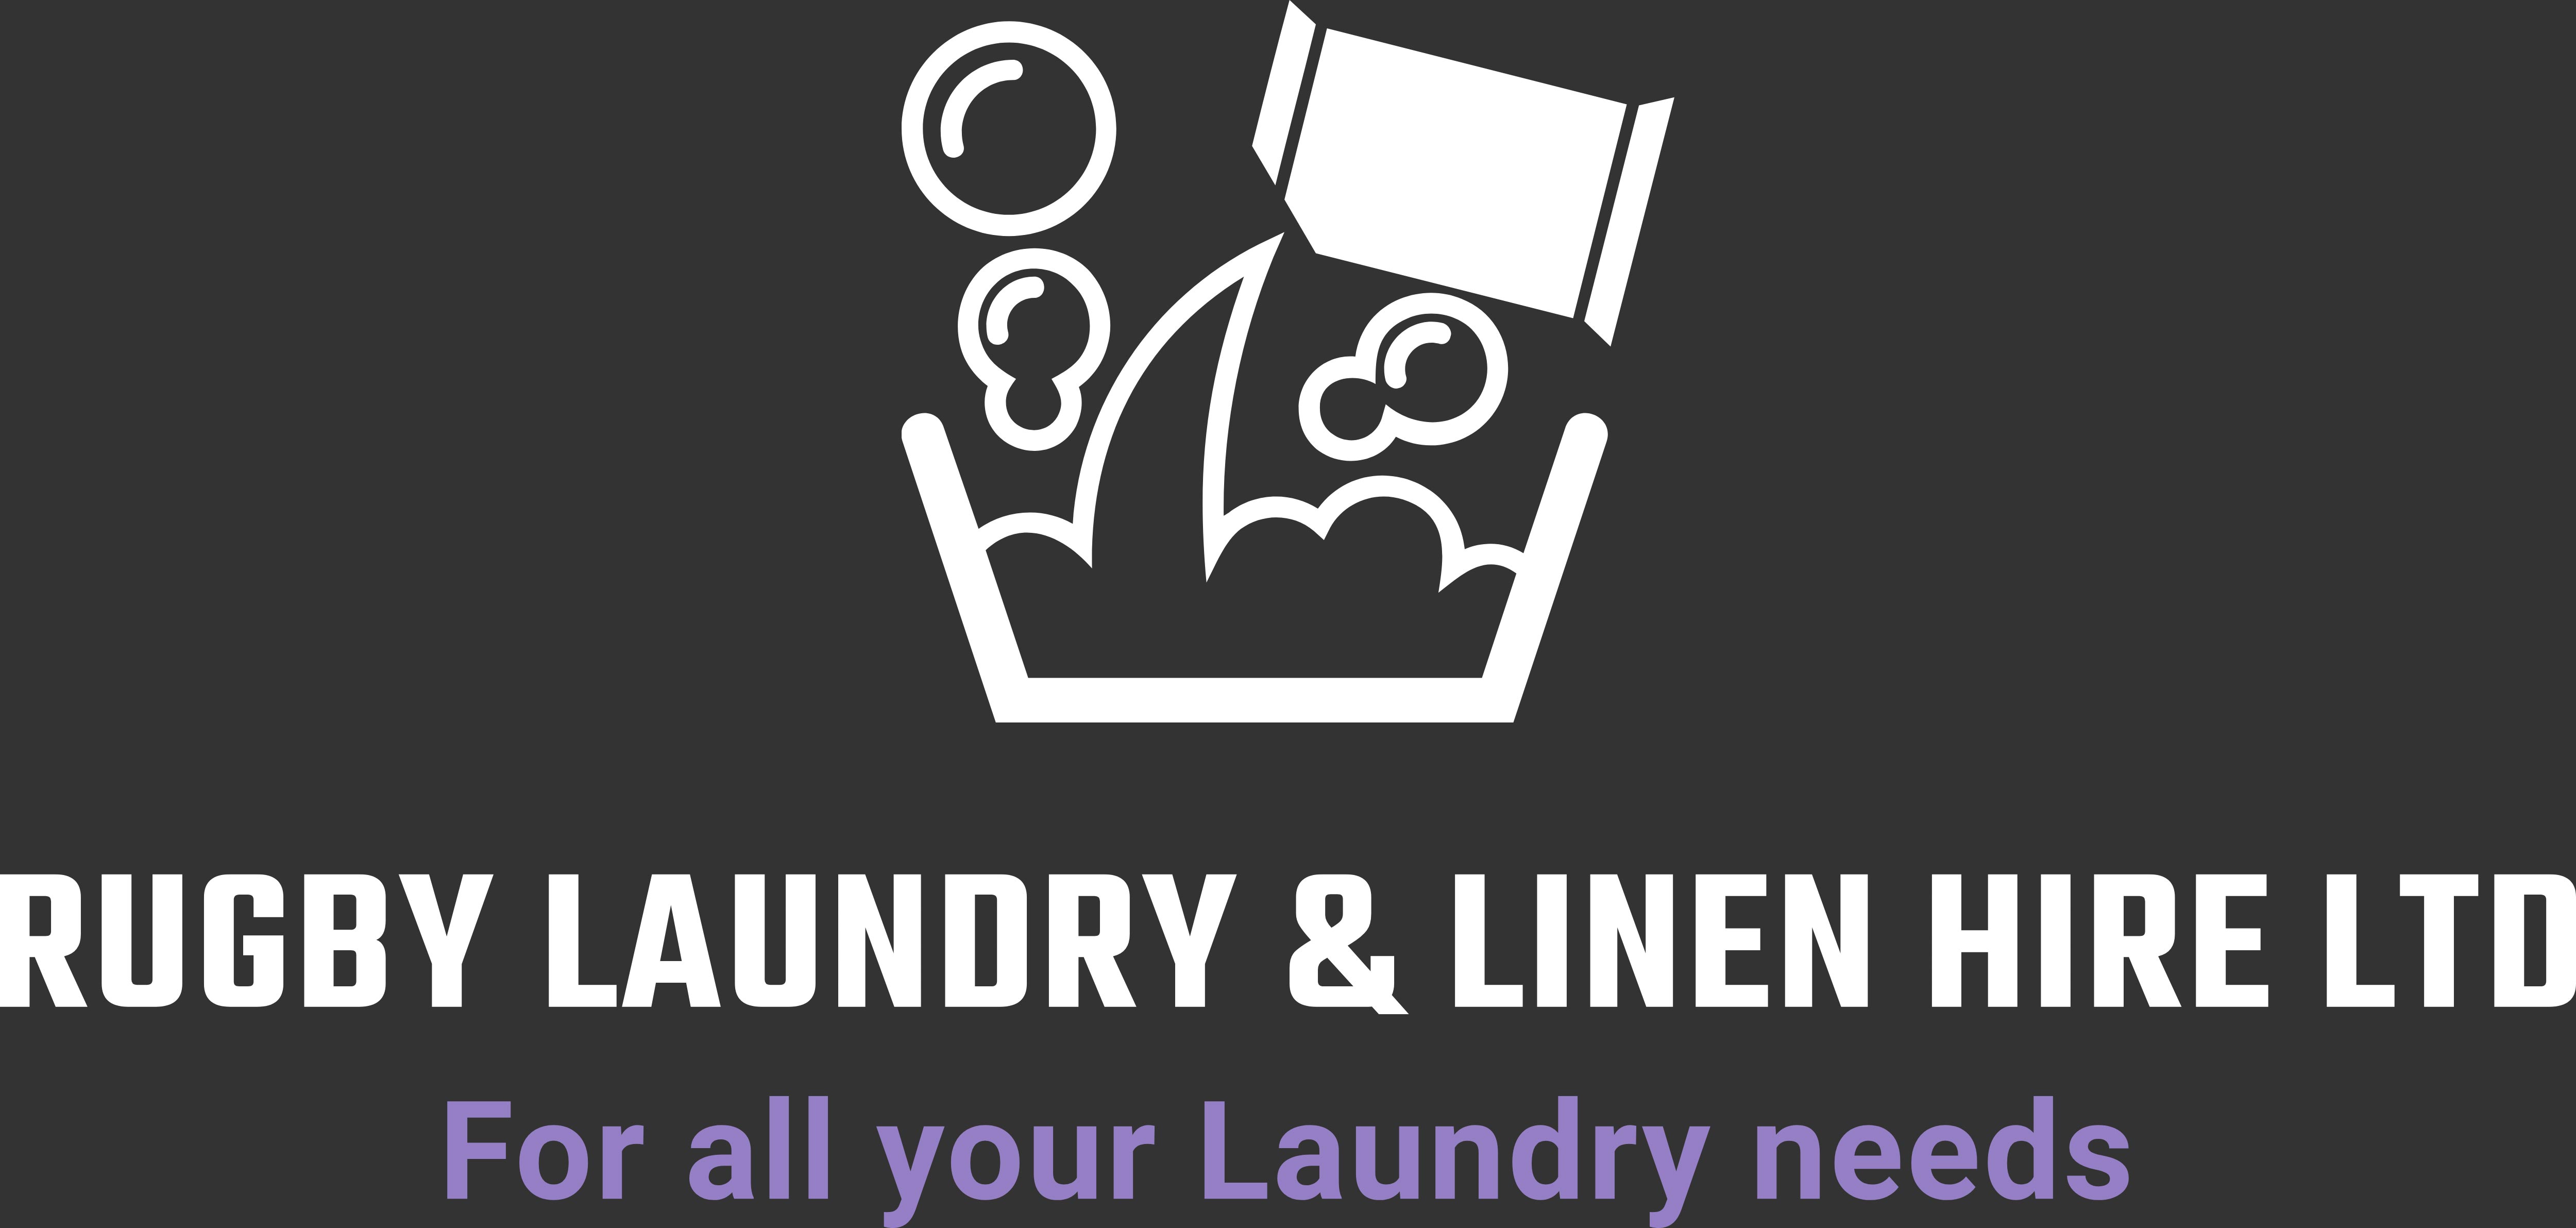 Rainbow Laundry & Linen Hire - Laundry service in Rugby